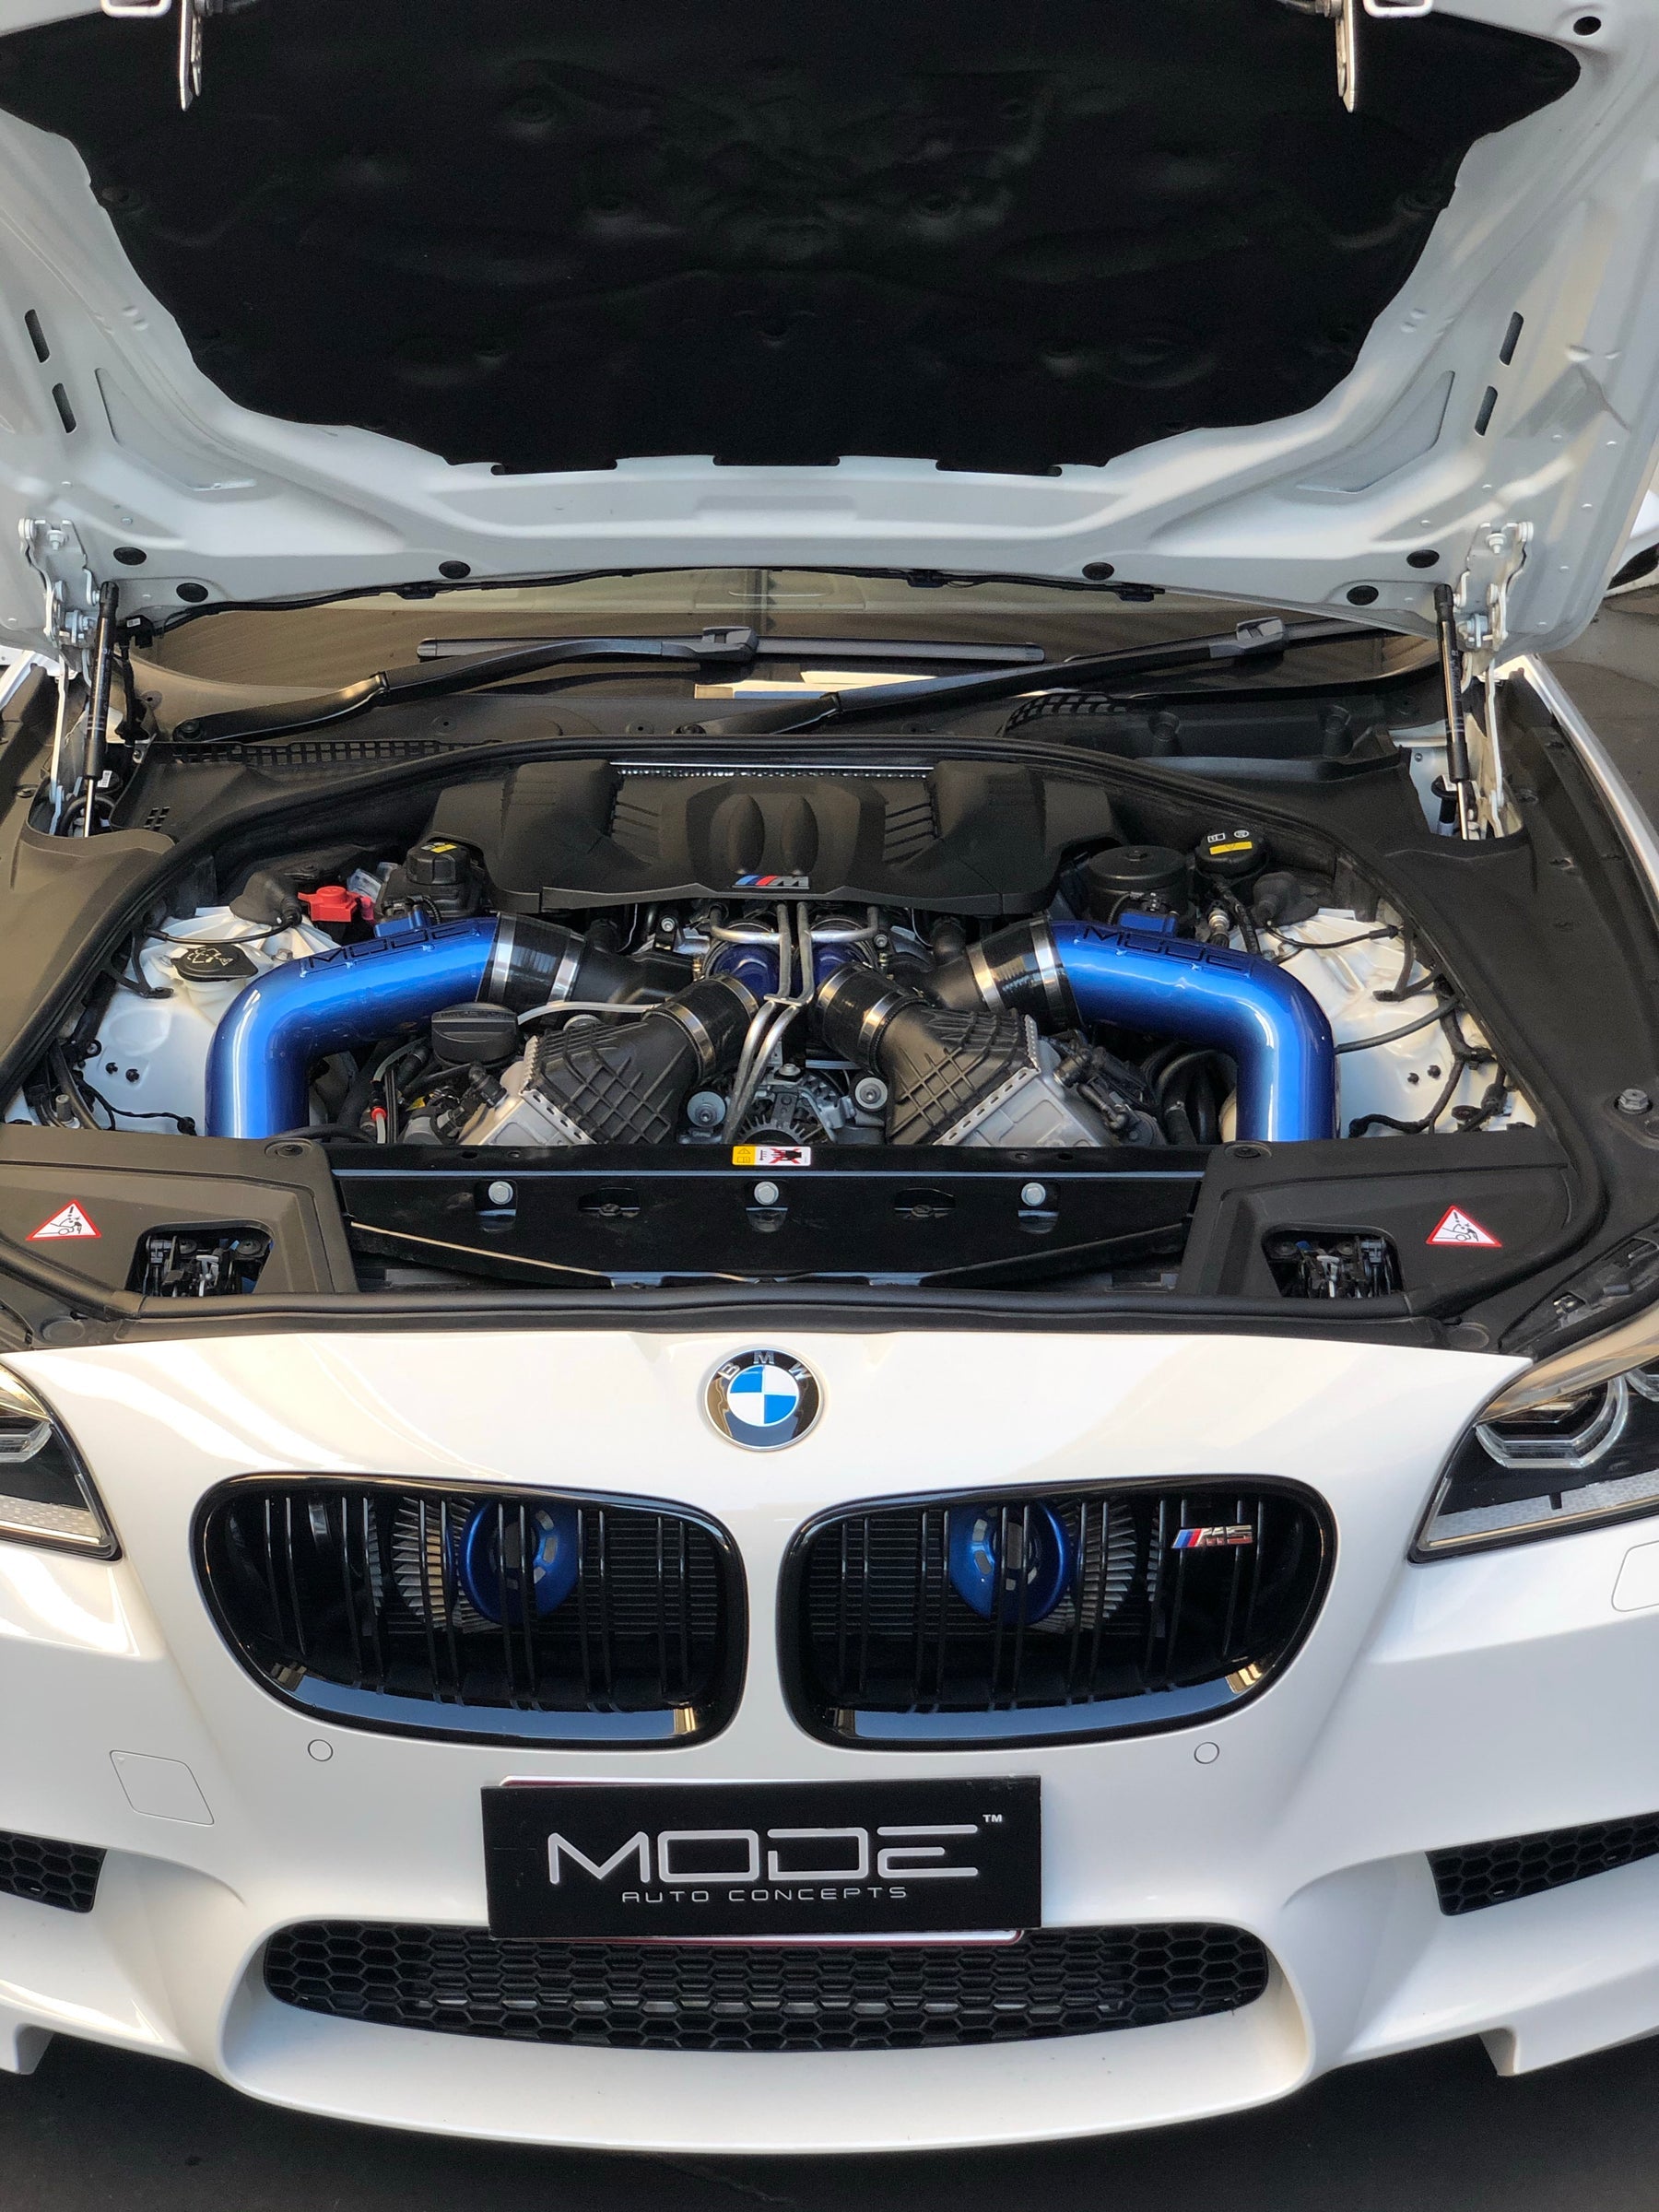 MODE x bootmod3 bm3 Stage 2 655hp+ Power Pack suit S63 BMW M5 F10 M6 F06 F12 F13 - MODE Auto Concepts